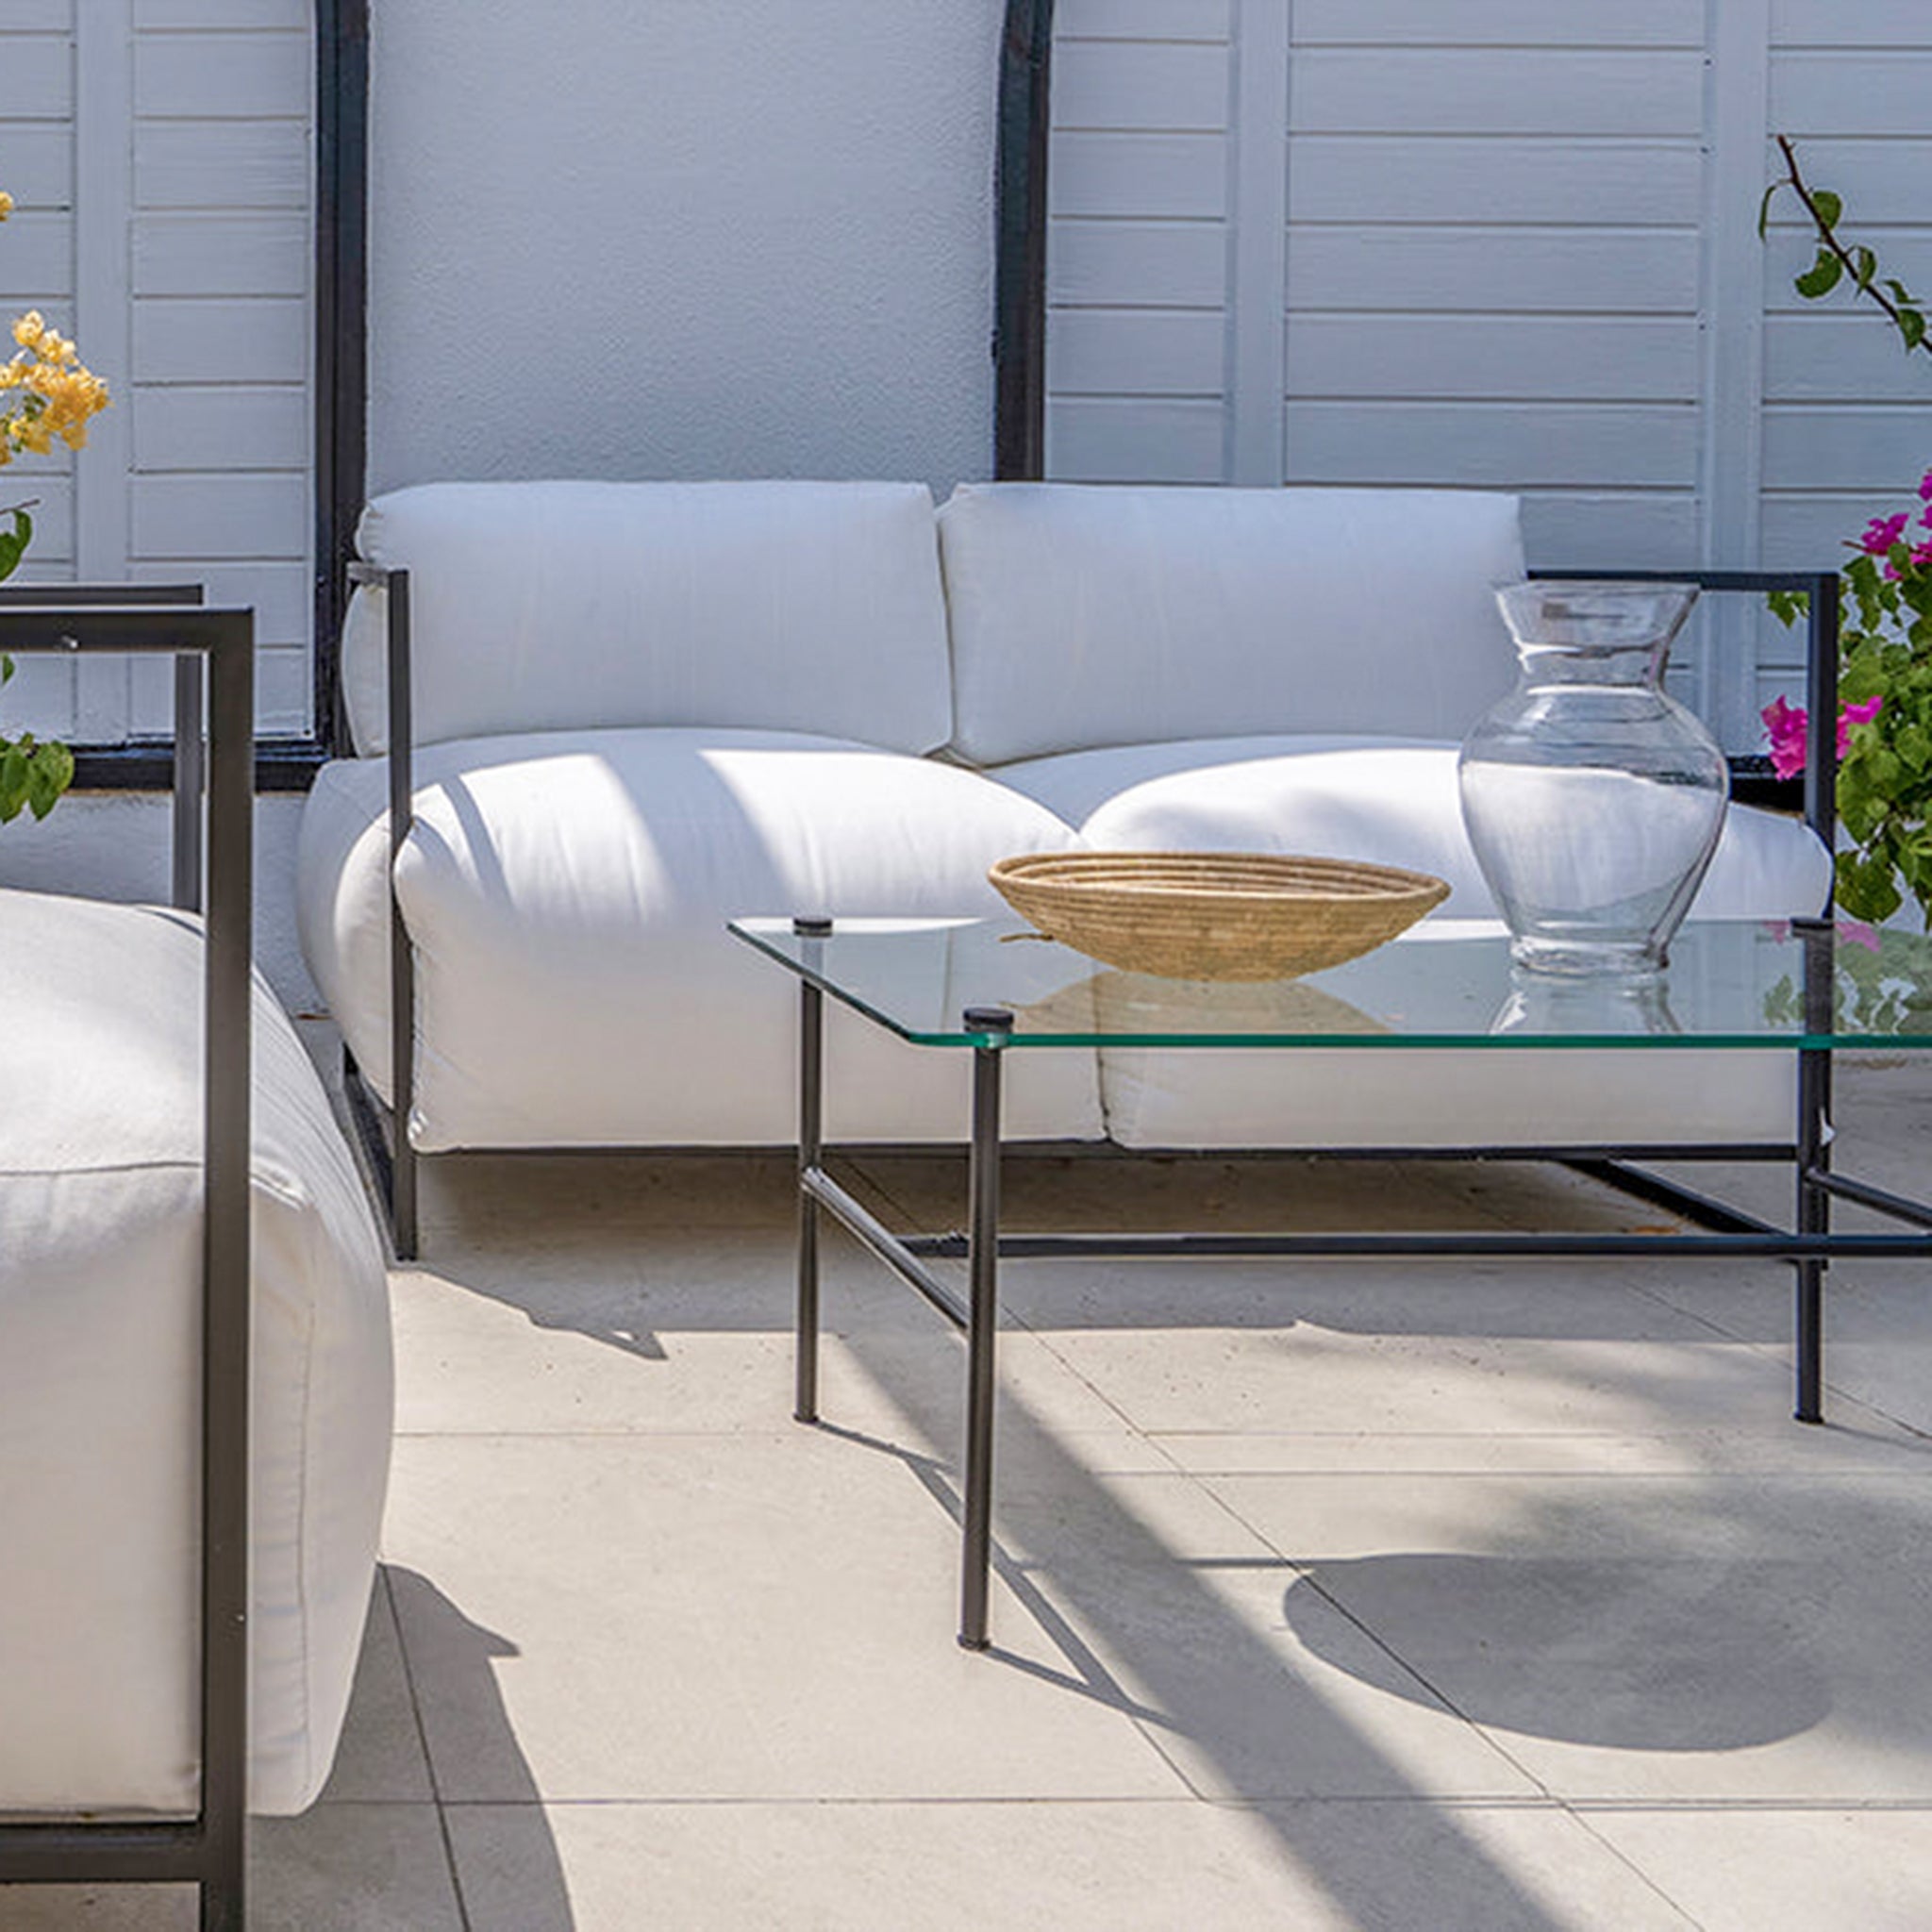 Modern outdoor living with the Dexter three-seater sofa. Durable steel frame and fade-resistant fabric make it perfect for patios.